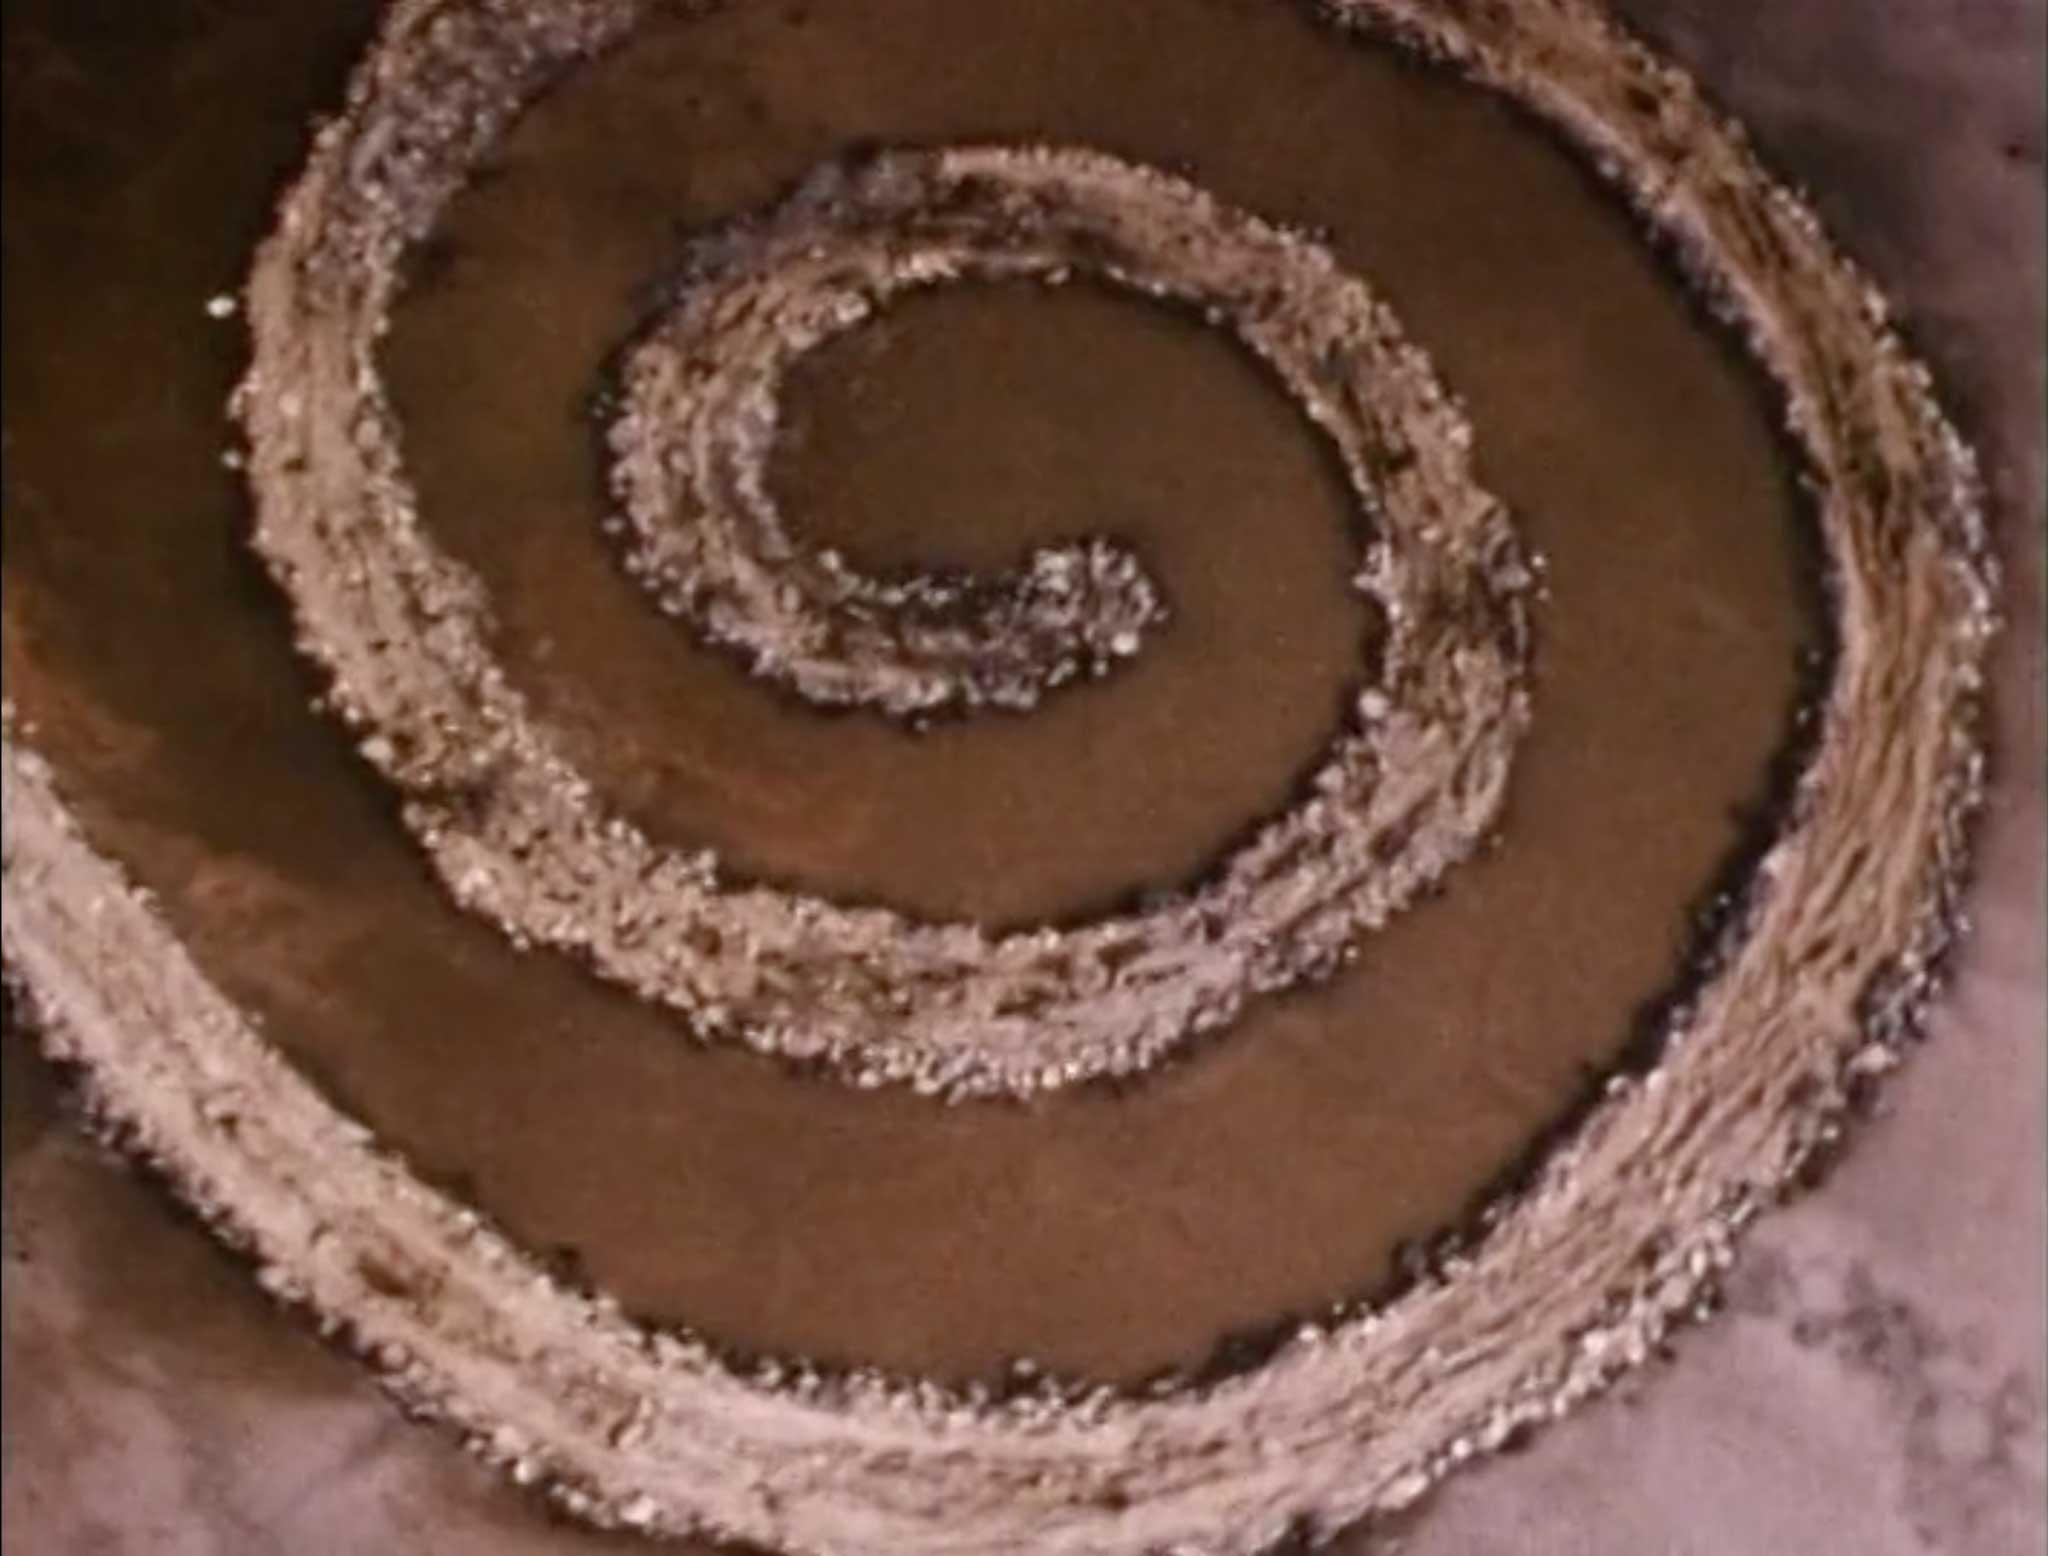 a still from the film Spiral Jetty showing an aerial view of the Jetty